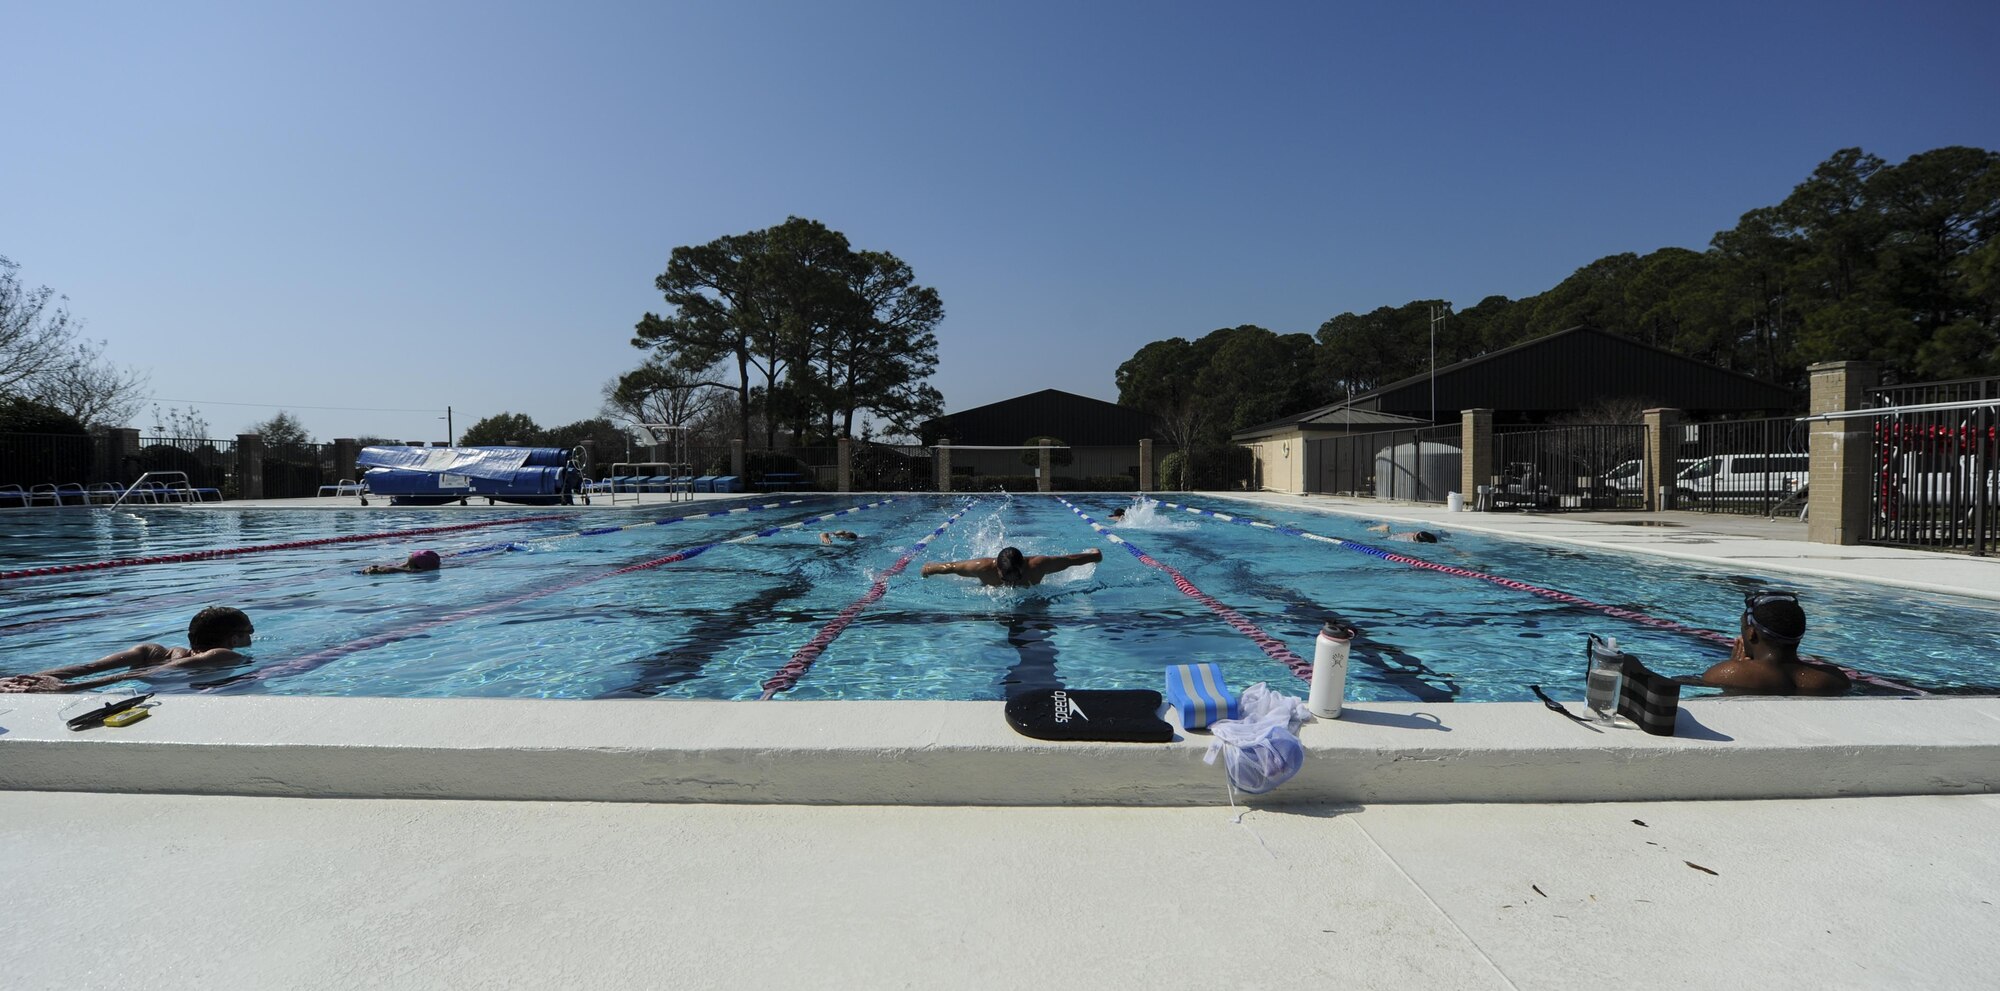 Air Commandos use the aquatic center pool at Hurlburt Field, Fla., Feb. 14, 2017. Hurlburt Field’s Aquatic Center pool deck and bathrooms were recently renovated and a handicap lift was added to provide a safer environment for all pool members. (U.S. Air Force photo by Airman 1st Class Dennis Spain)